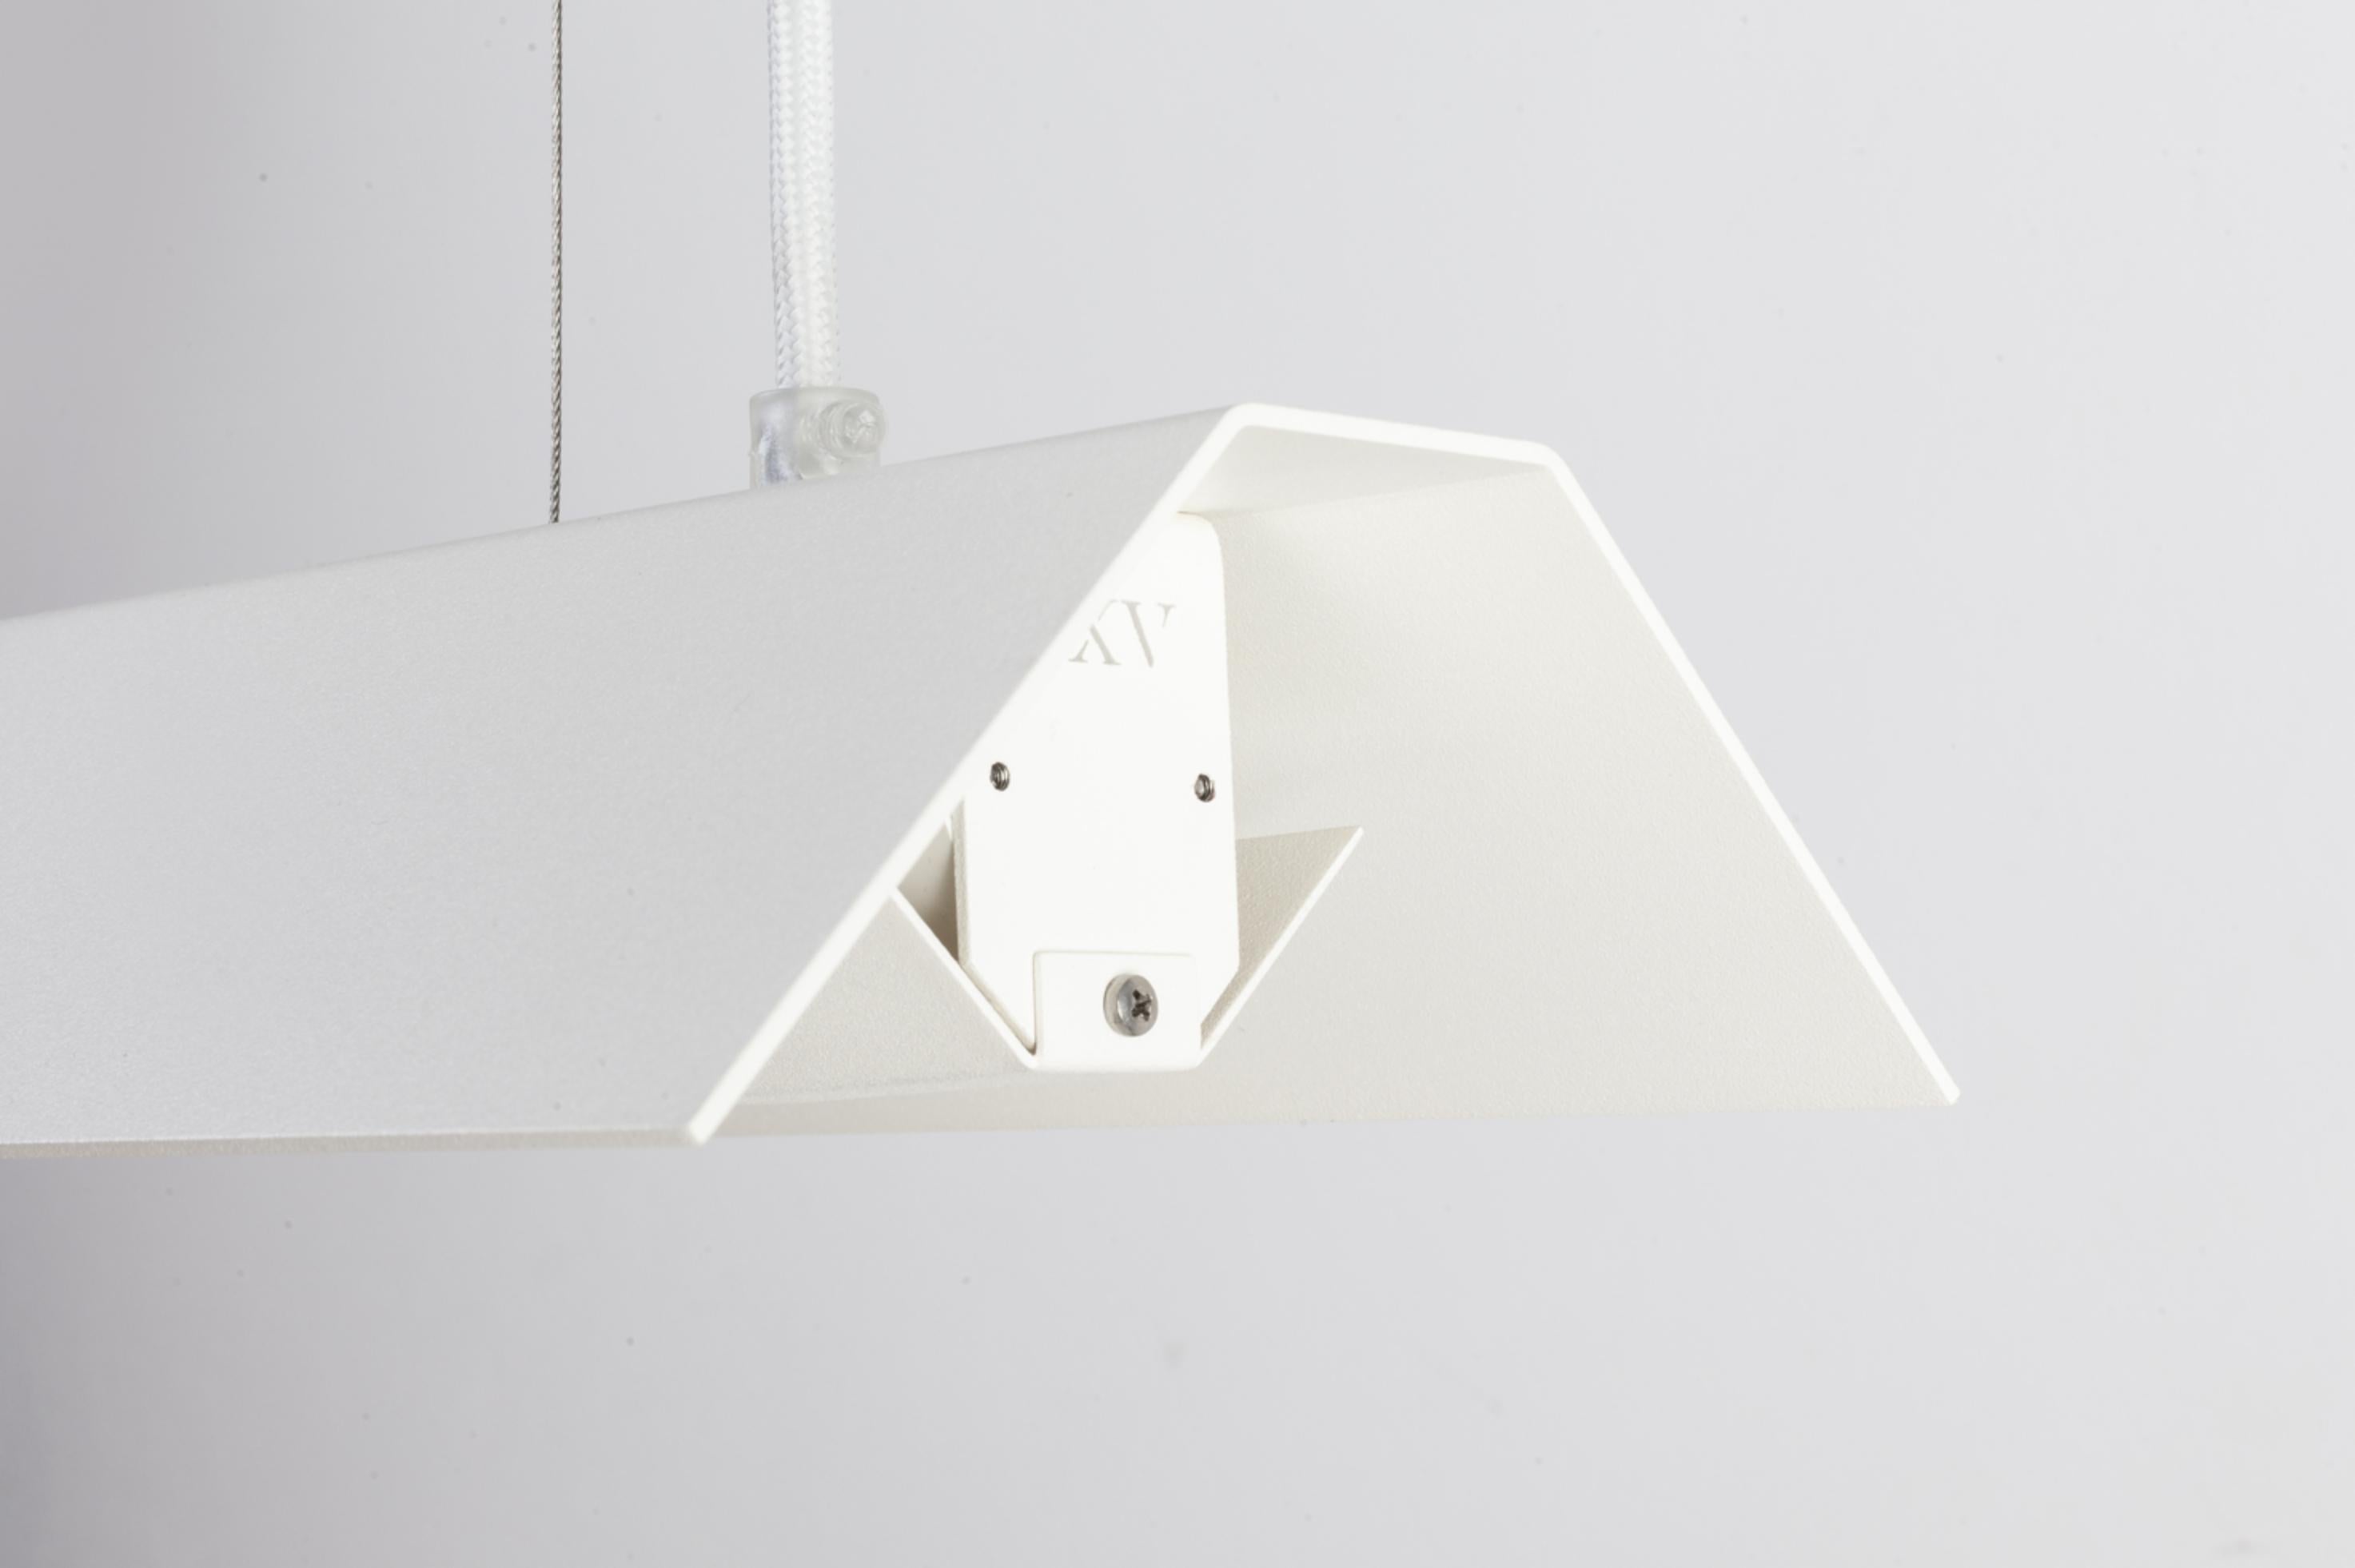 Extra Large Misalliance Ral Pure White Suspended Light by Lexavala
Dimensions: D 16 x W 160 x H 8 cm
Materials: powder coated aluminium.

There are two lenghts of socket covers, extending over the LED. Two short are to be found in Suspended and